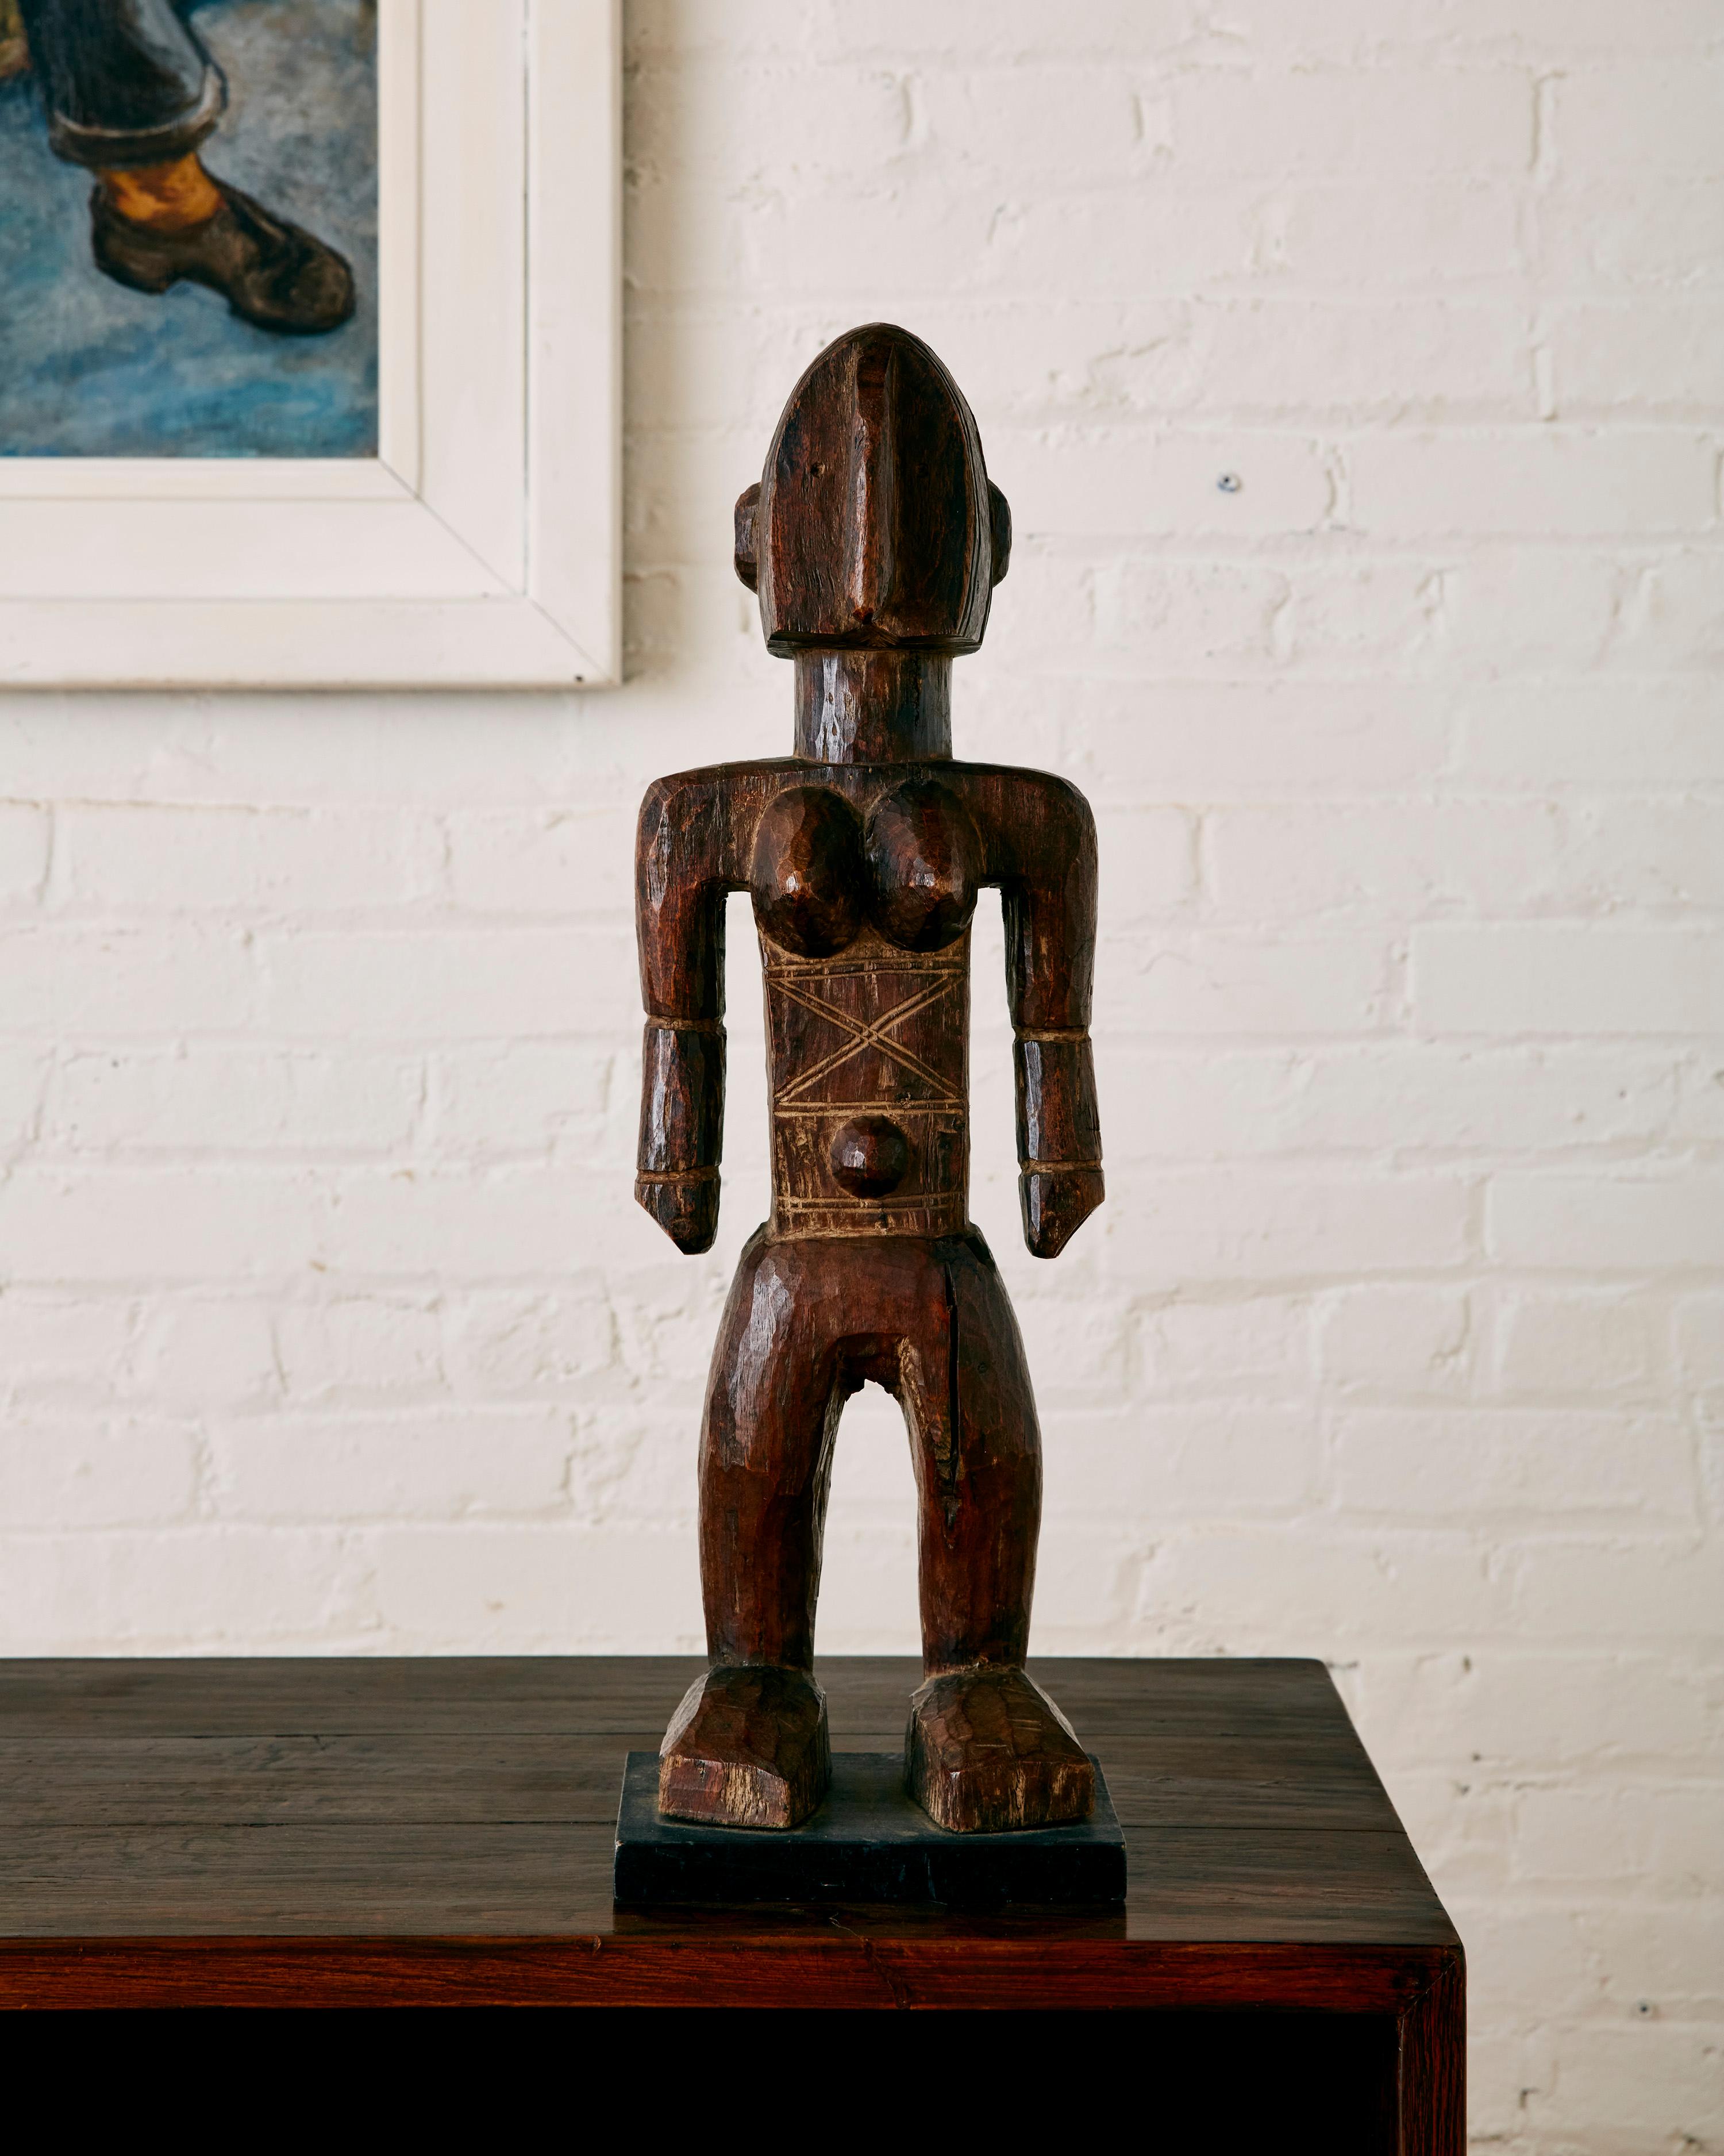 West African Bambara Sculpture depicting a Female Figure.

Bambara sculpture is primarily devoted to female figures. One important category is 'Nyeleni', small-scaled depictions of young women used in Jo society initiation performances. The figures